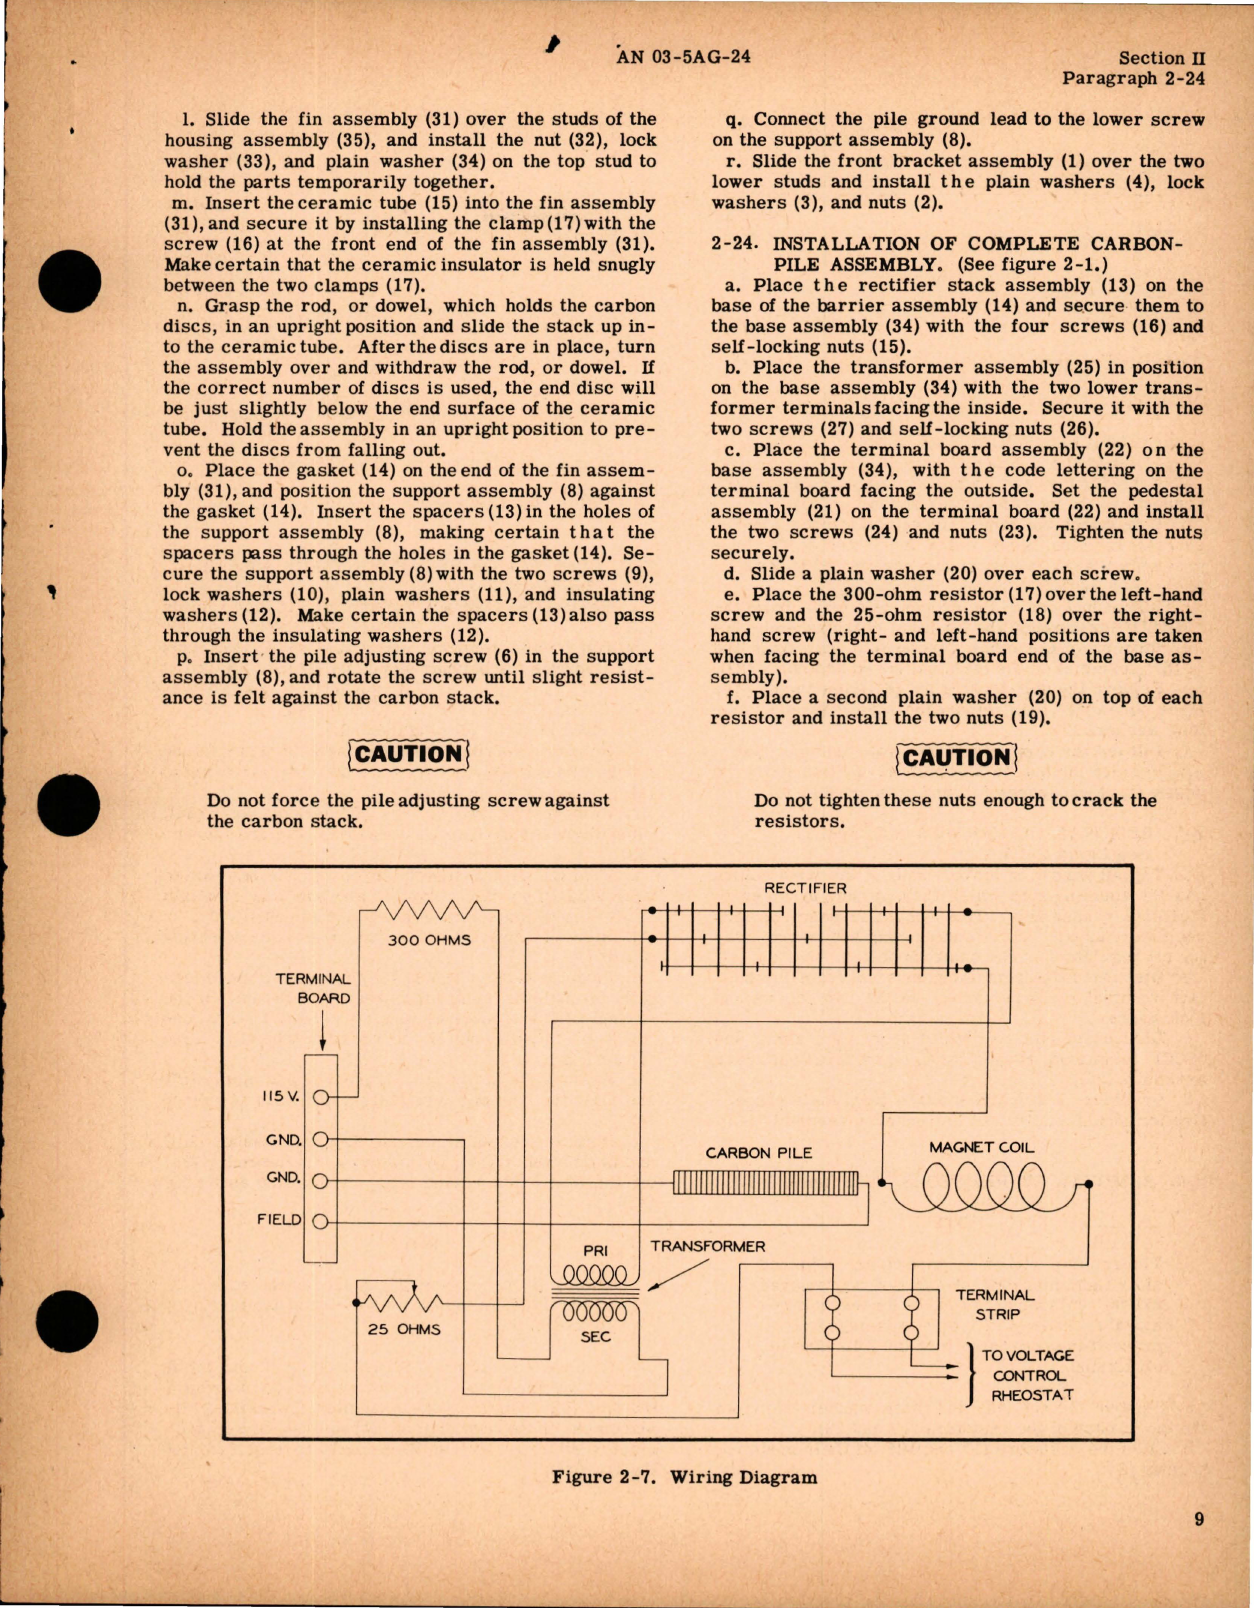 Sample page 7 from AirCorps Library document: Overhaul Instructions for Voltage Regulators - Models F36-70, F45-51, F45-90, F45-95, F49-70, and JH12999-3